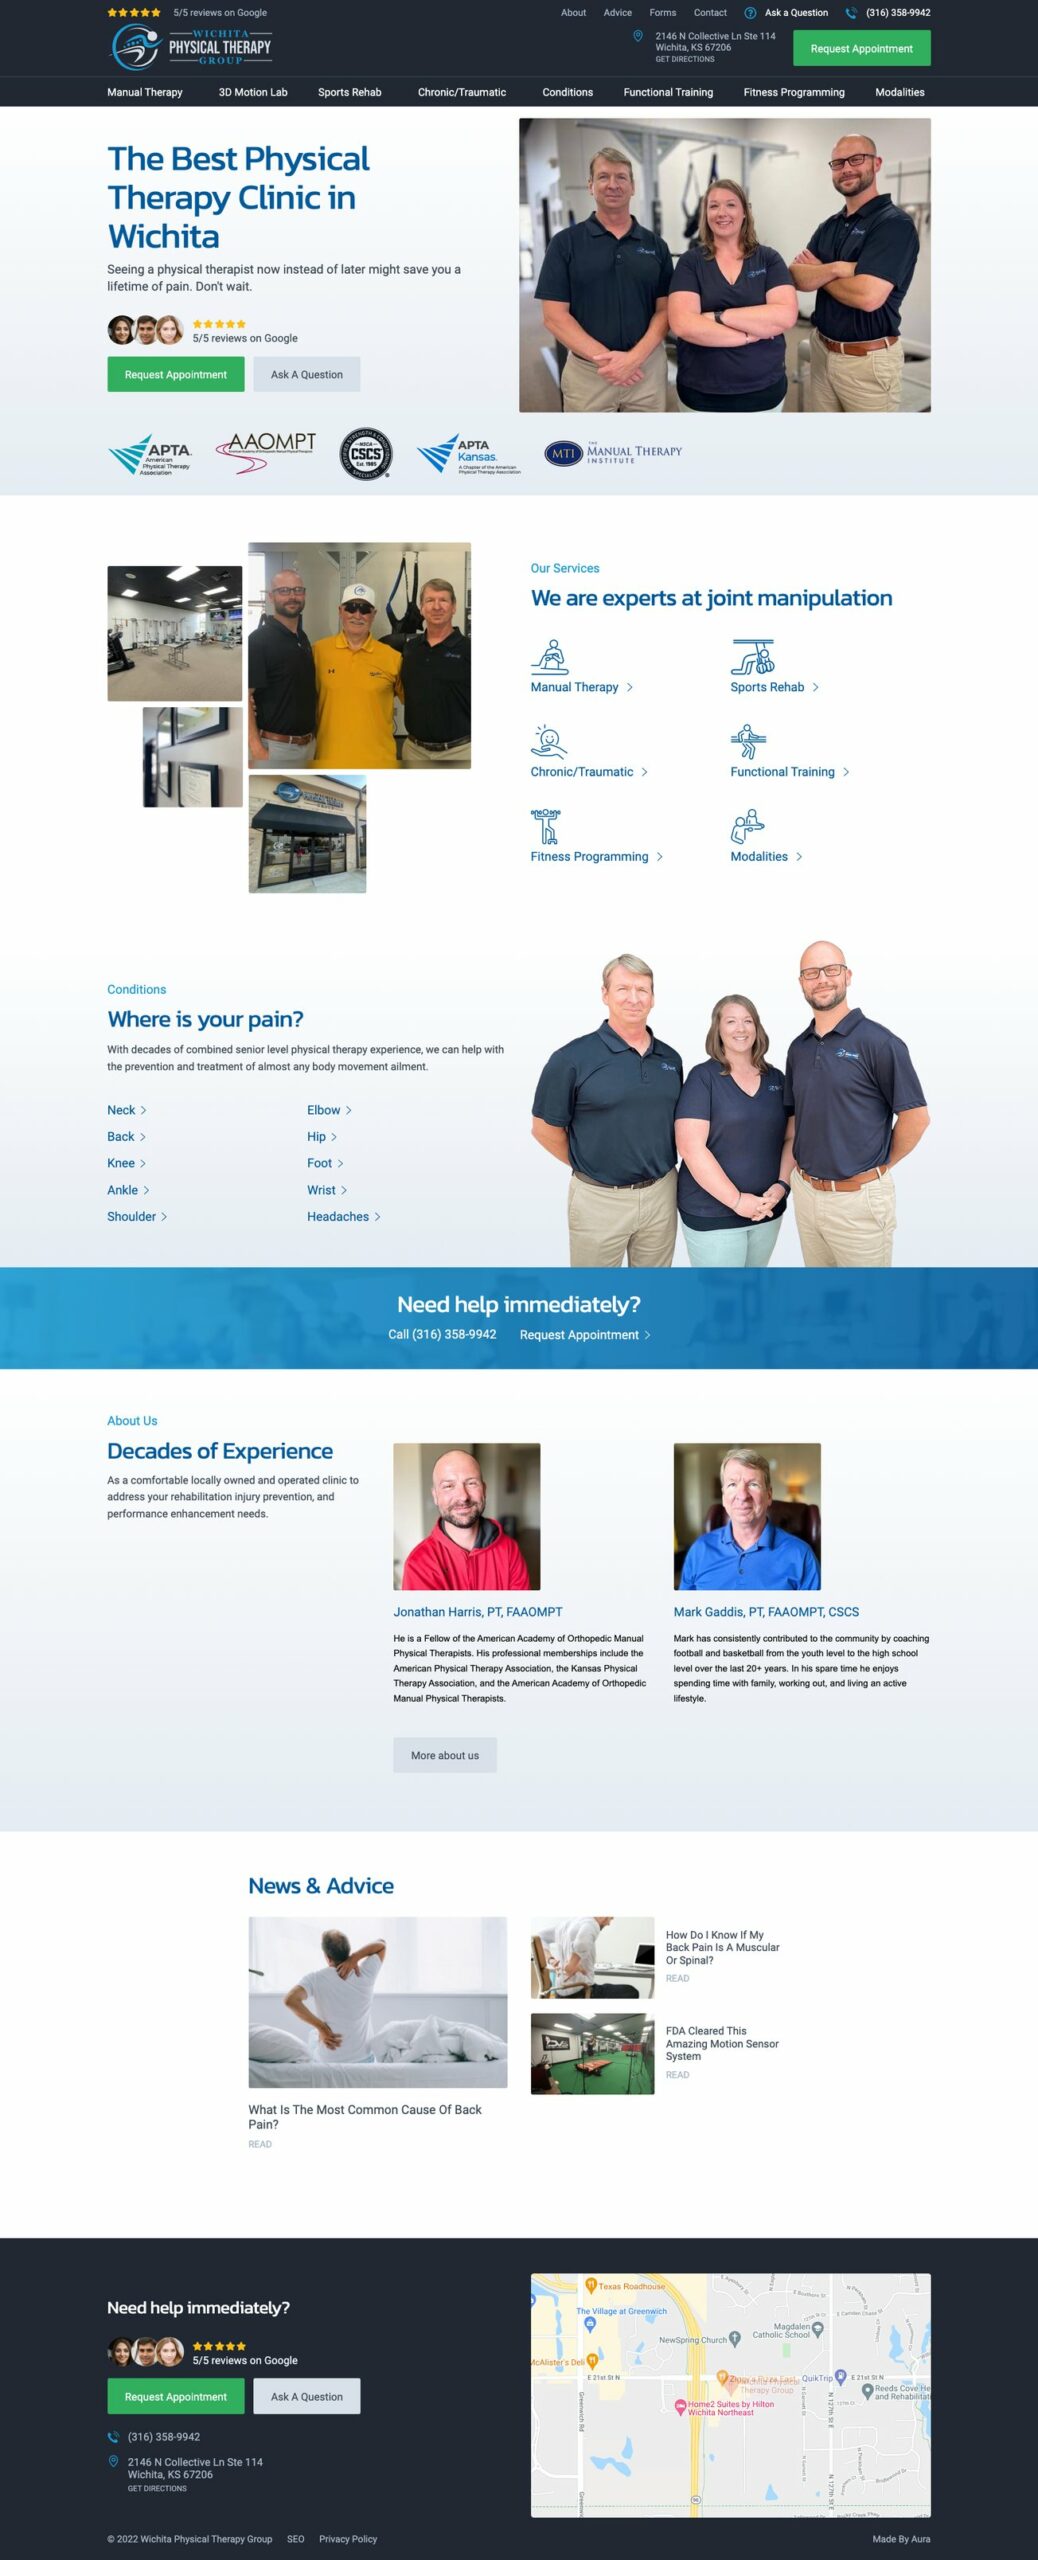 Web Design For A Physical Therapy Clinic In Wichita